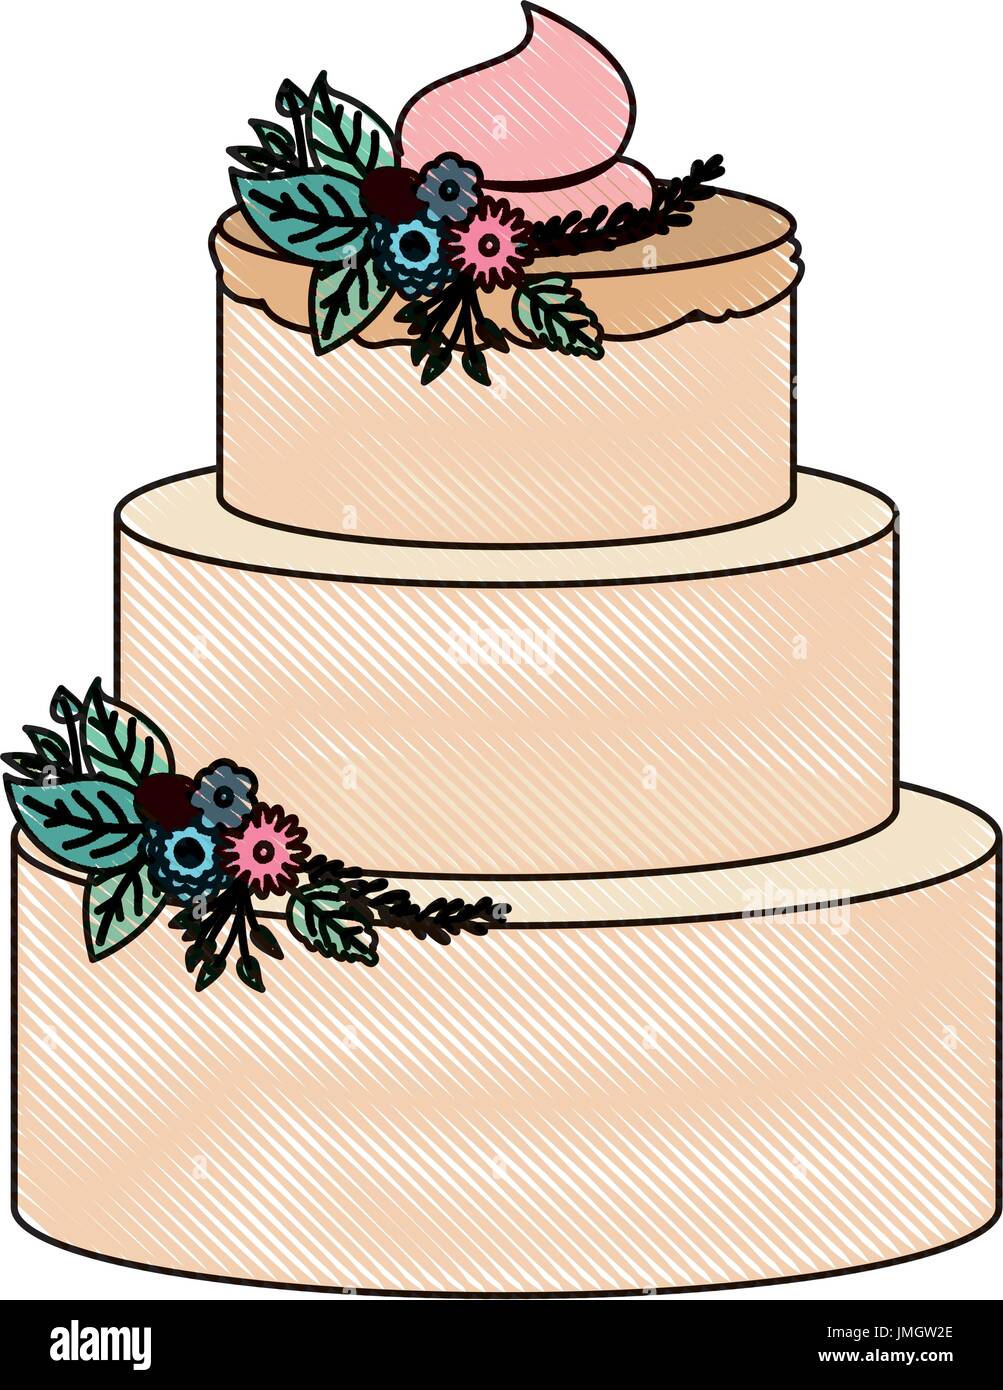 Sweet cake glazed cream food drawing color Vector Image